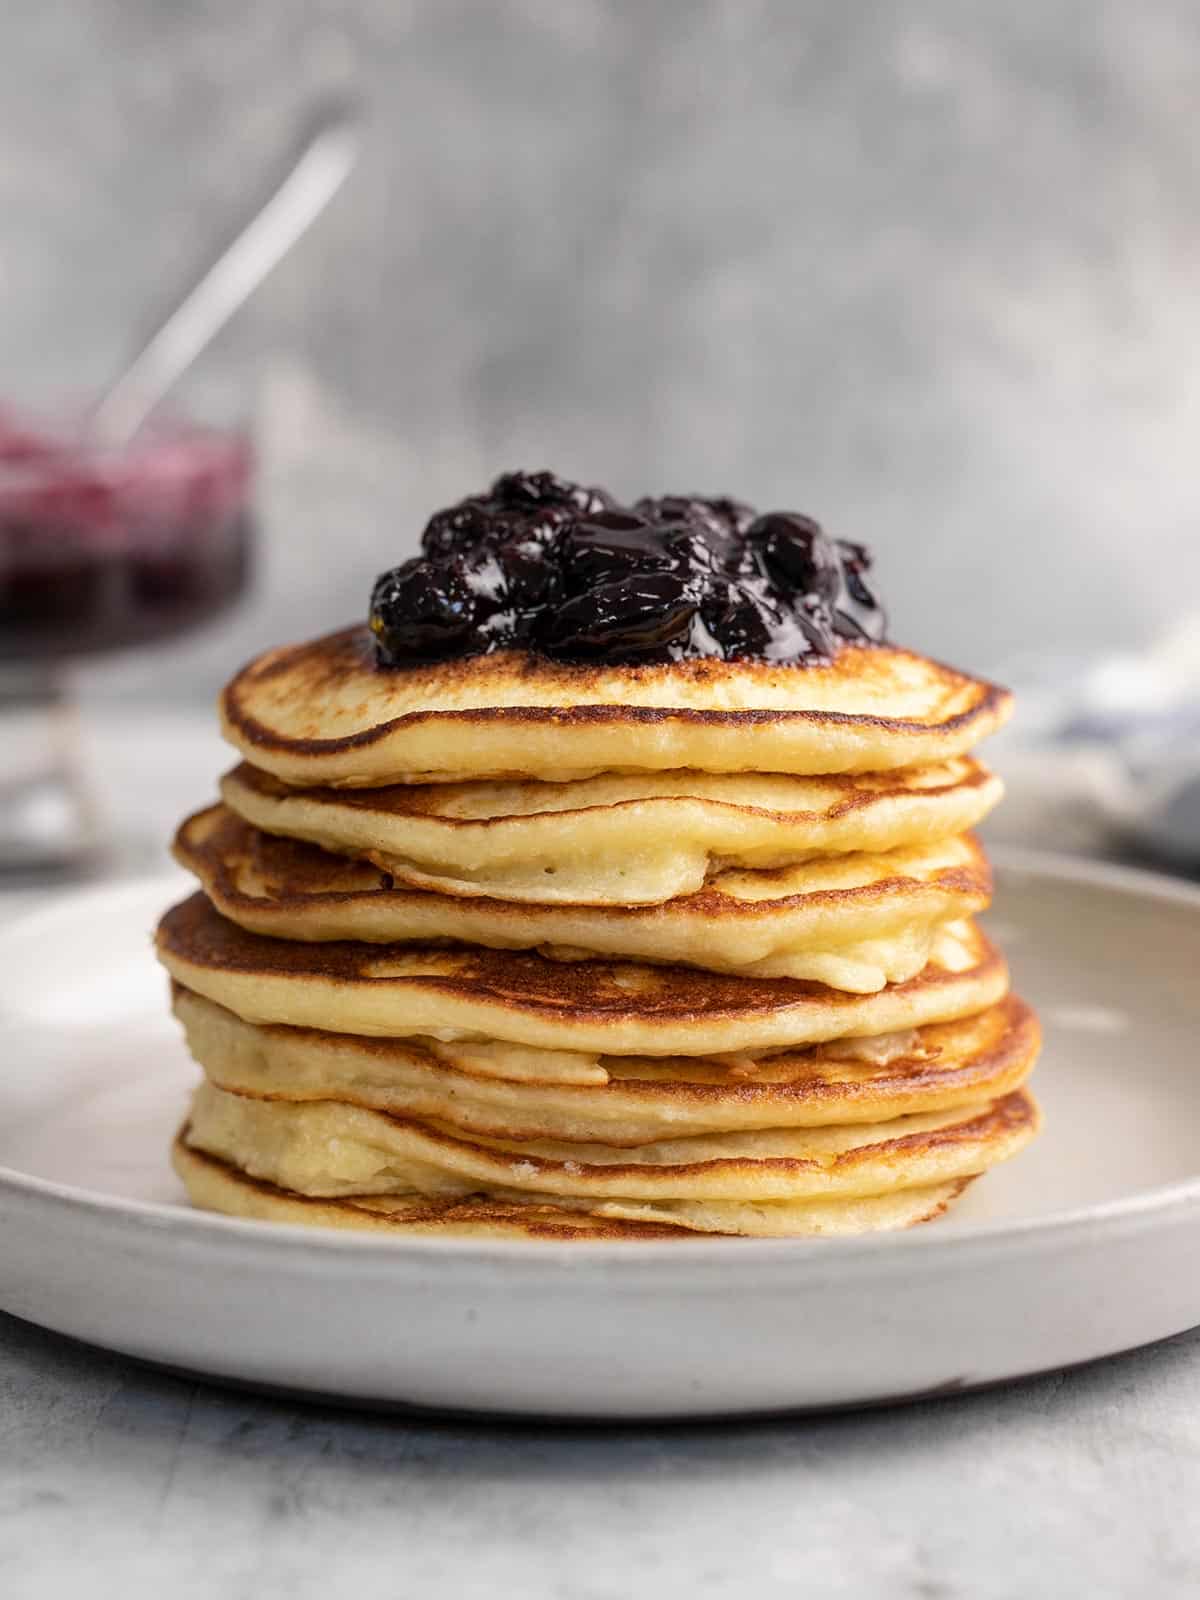 Side shot of a stack of ricotta pancakes with blueberry sauce on top.